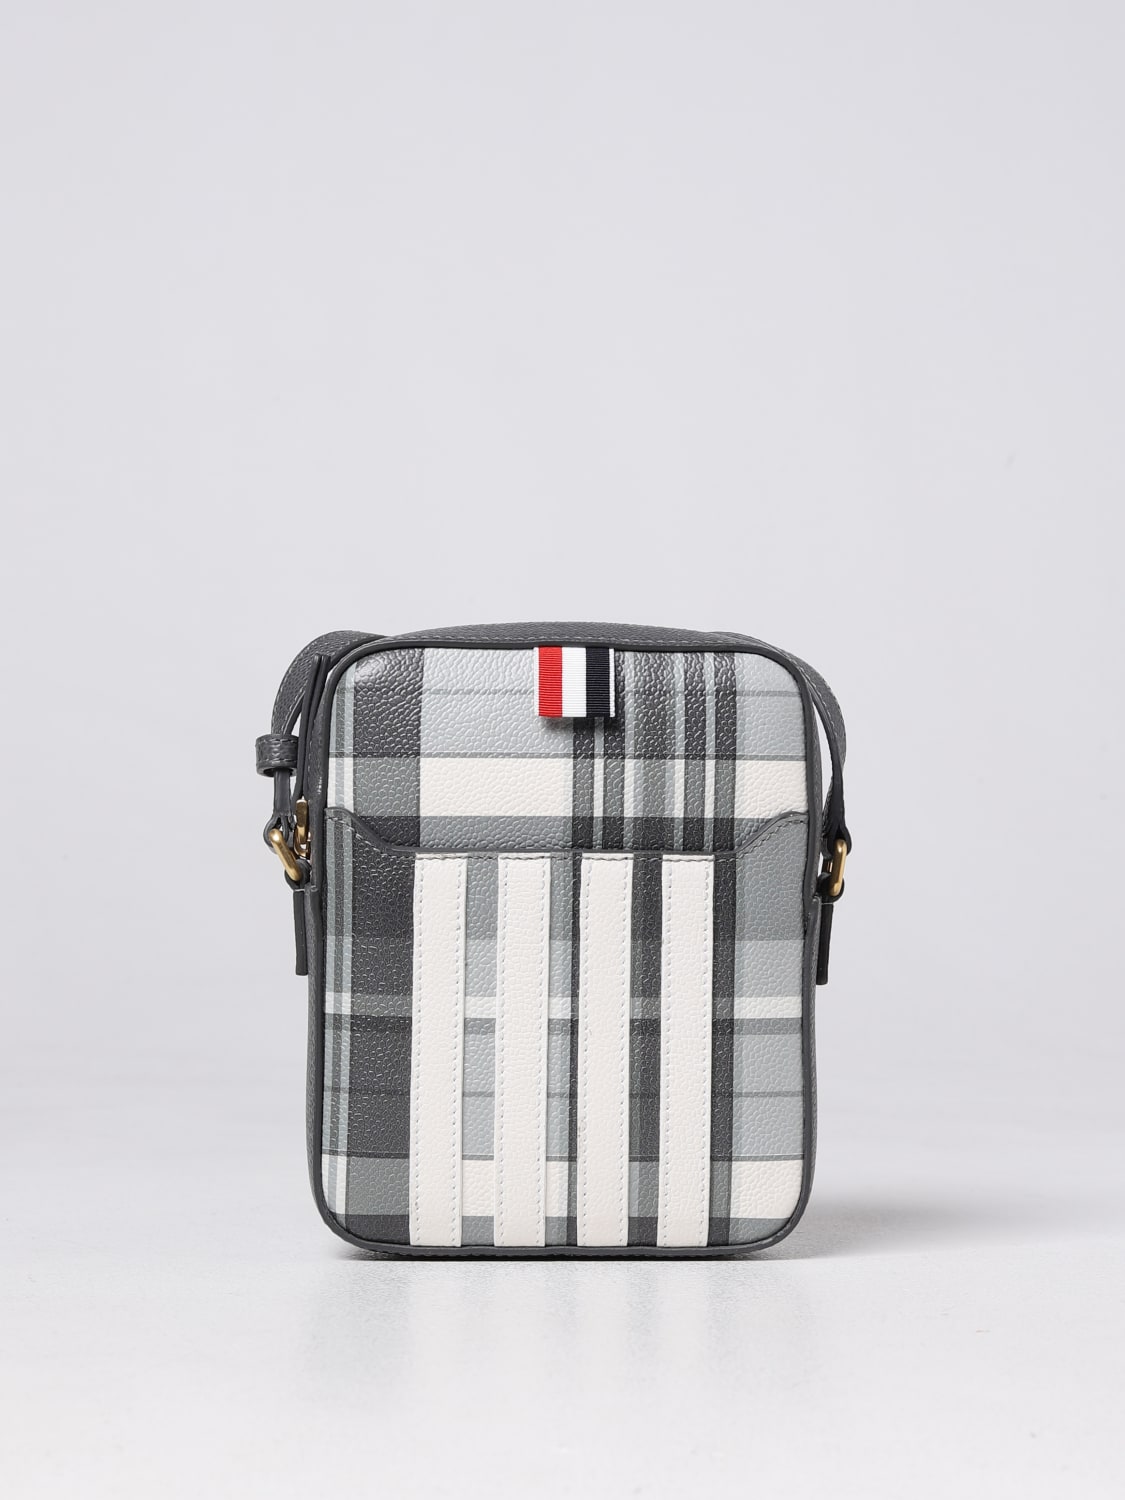 Thom Browne bag in grained leather